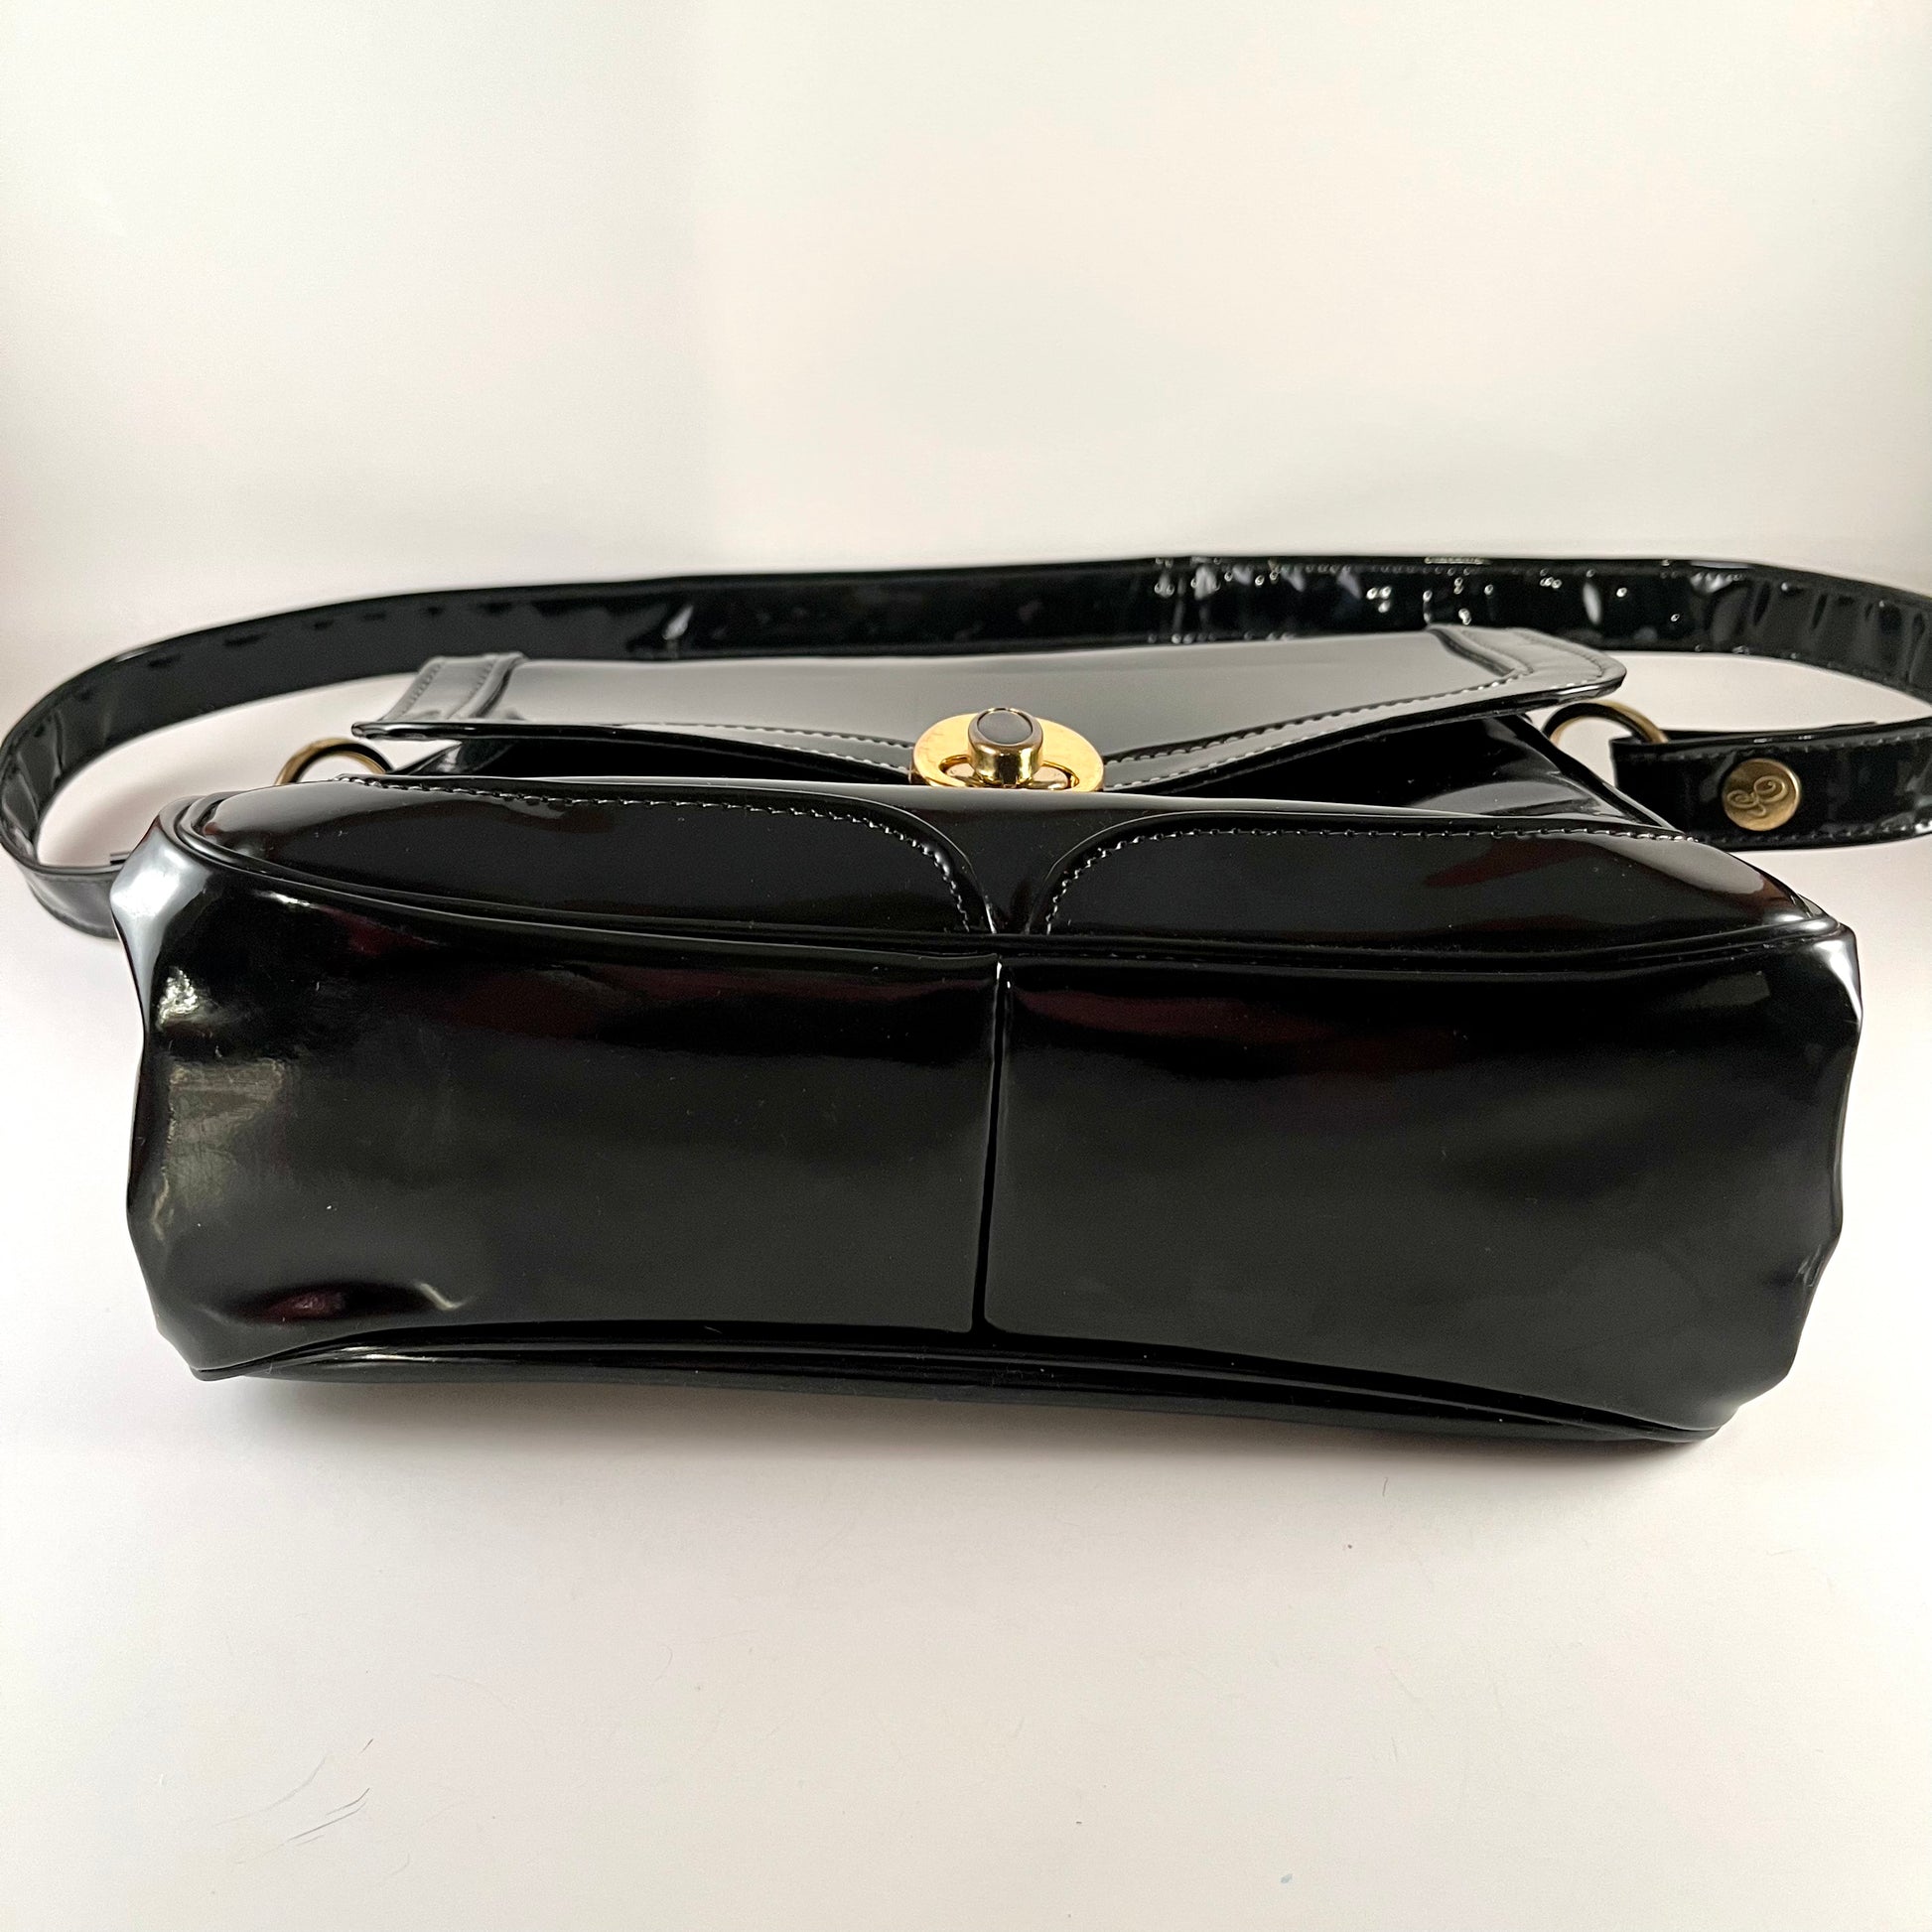 Vintage Gucci Patent Leather Hand Bag